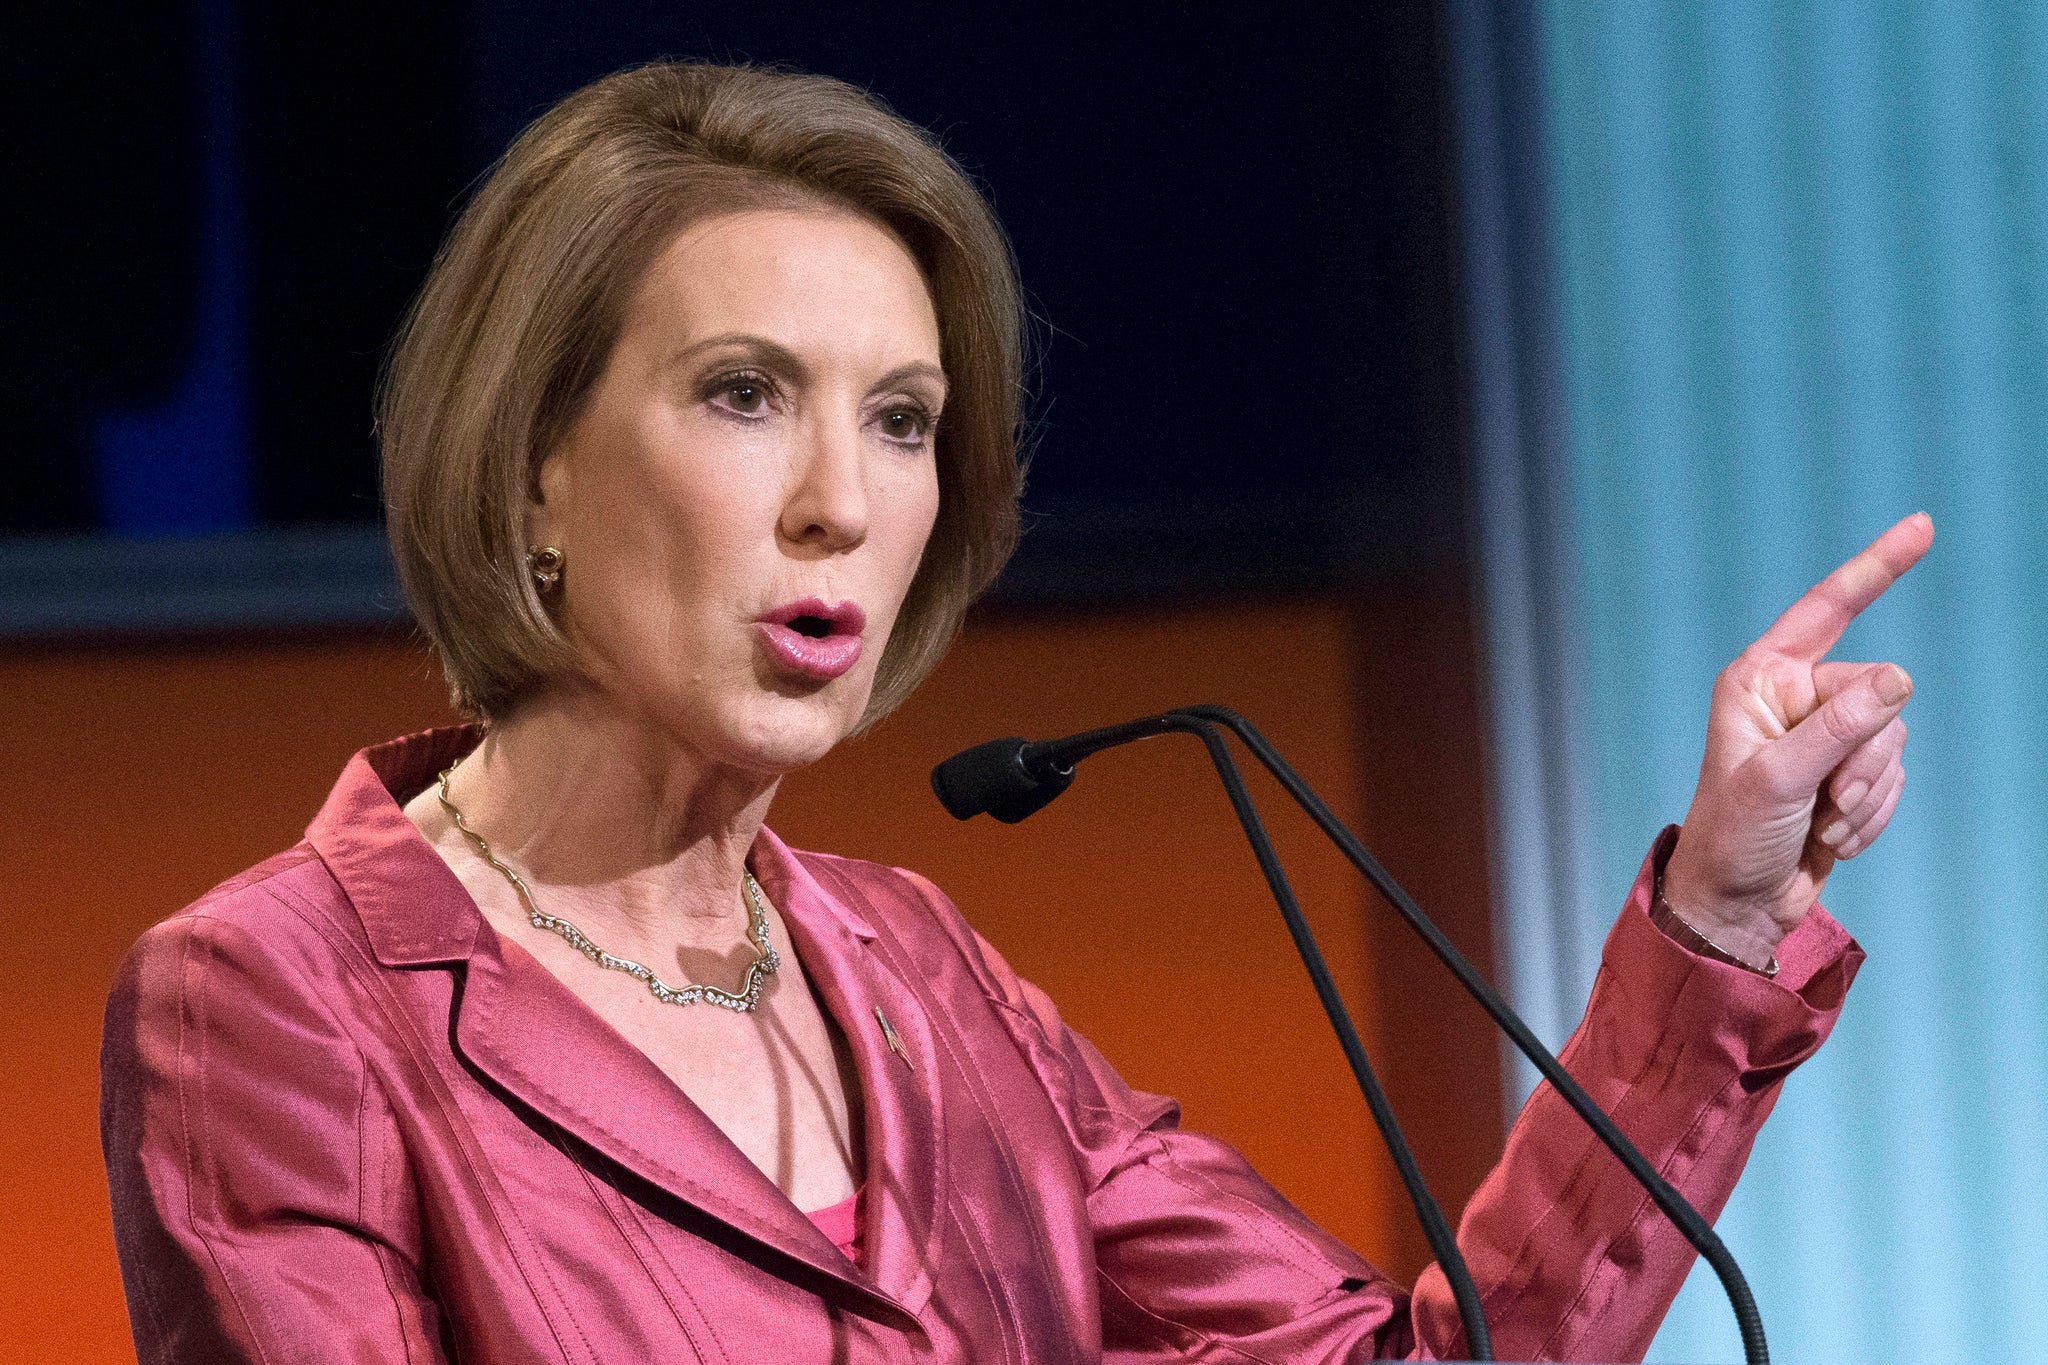 Carly Fiorina's popularity has grown since her performance in the first debate